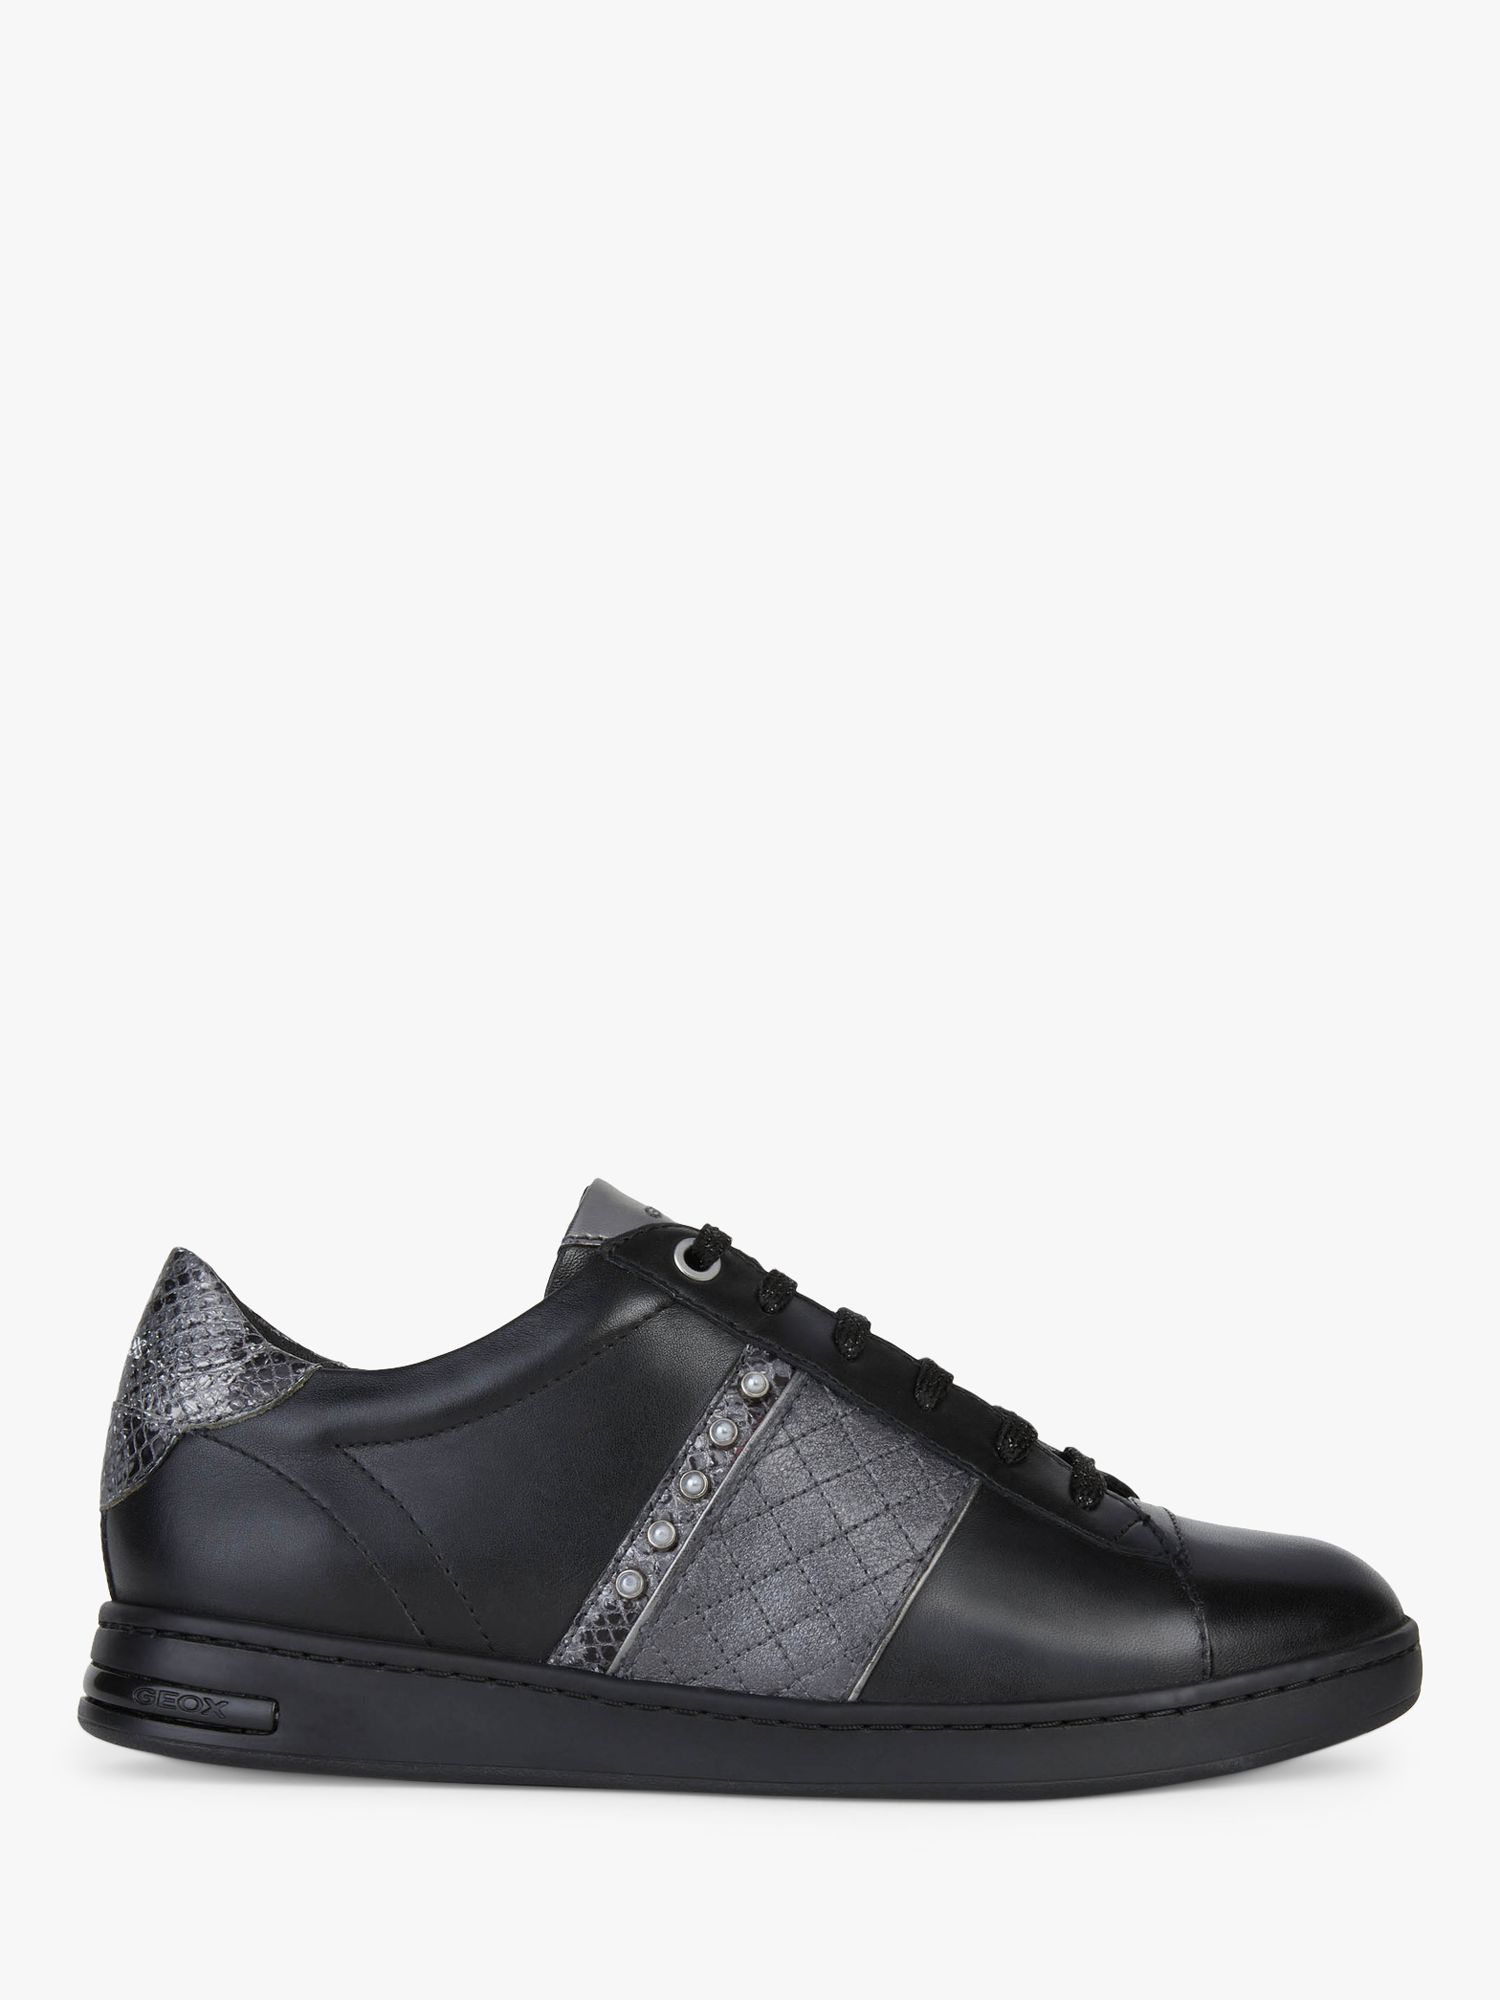 Geox Jaysen Leather Lace Up Trainers, Black John Lewis & Partners